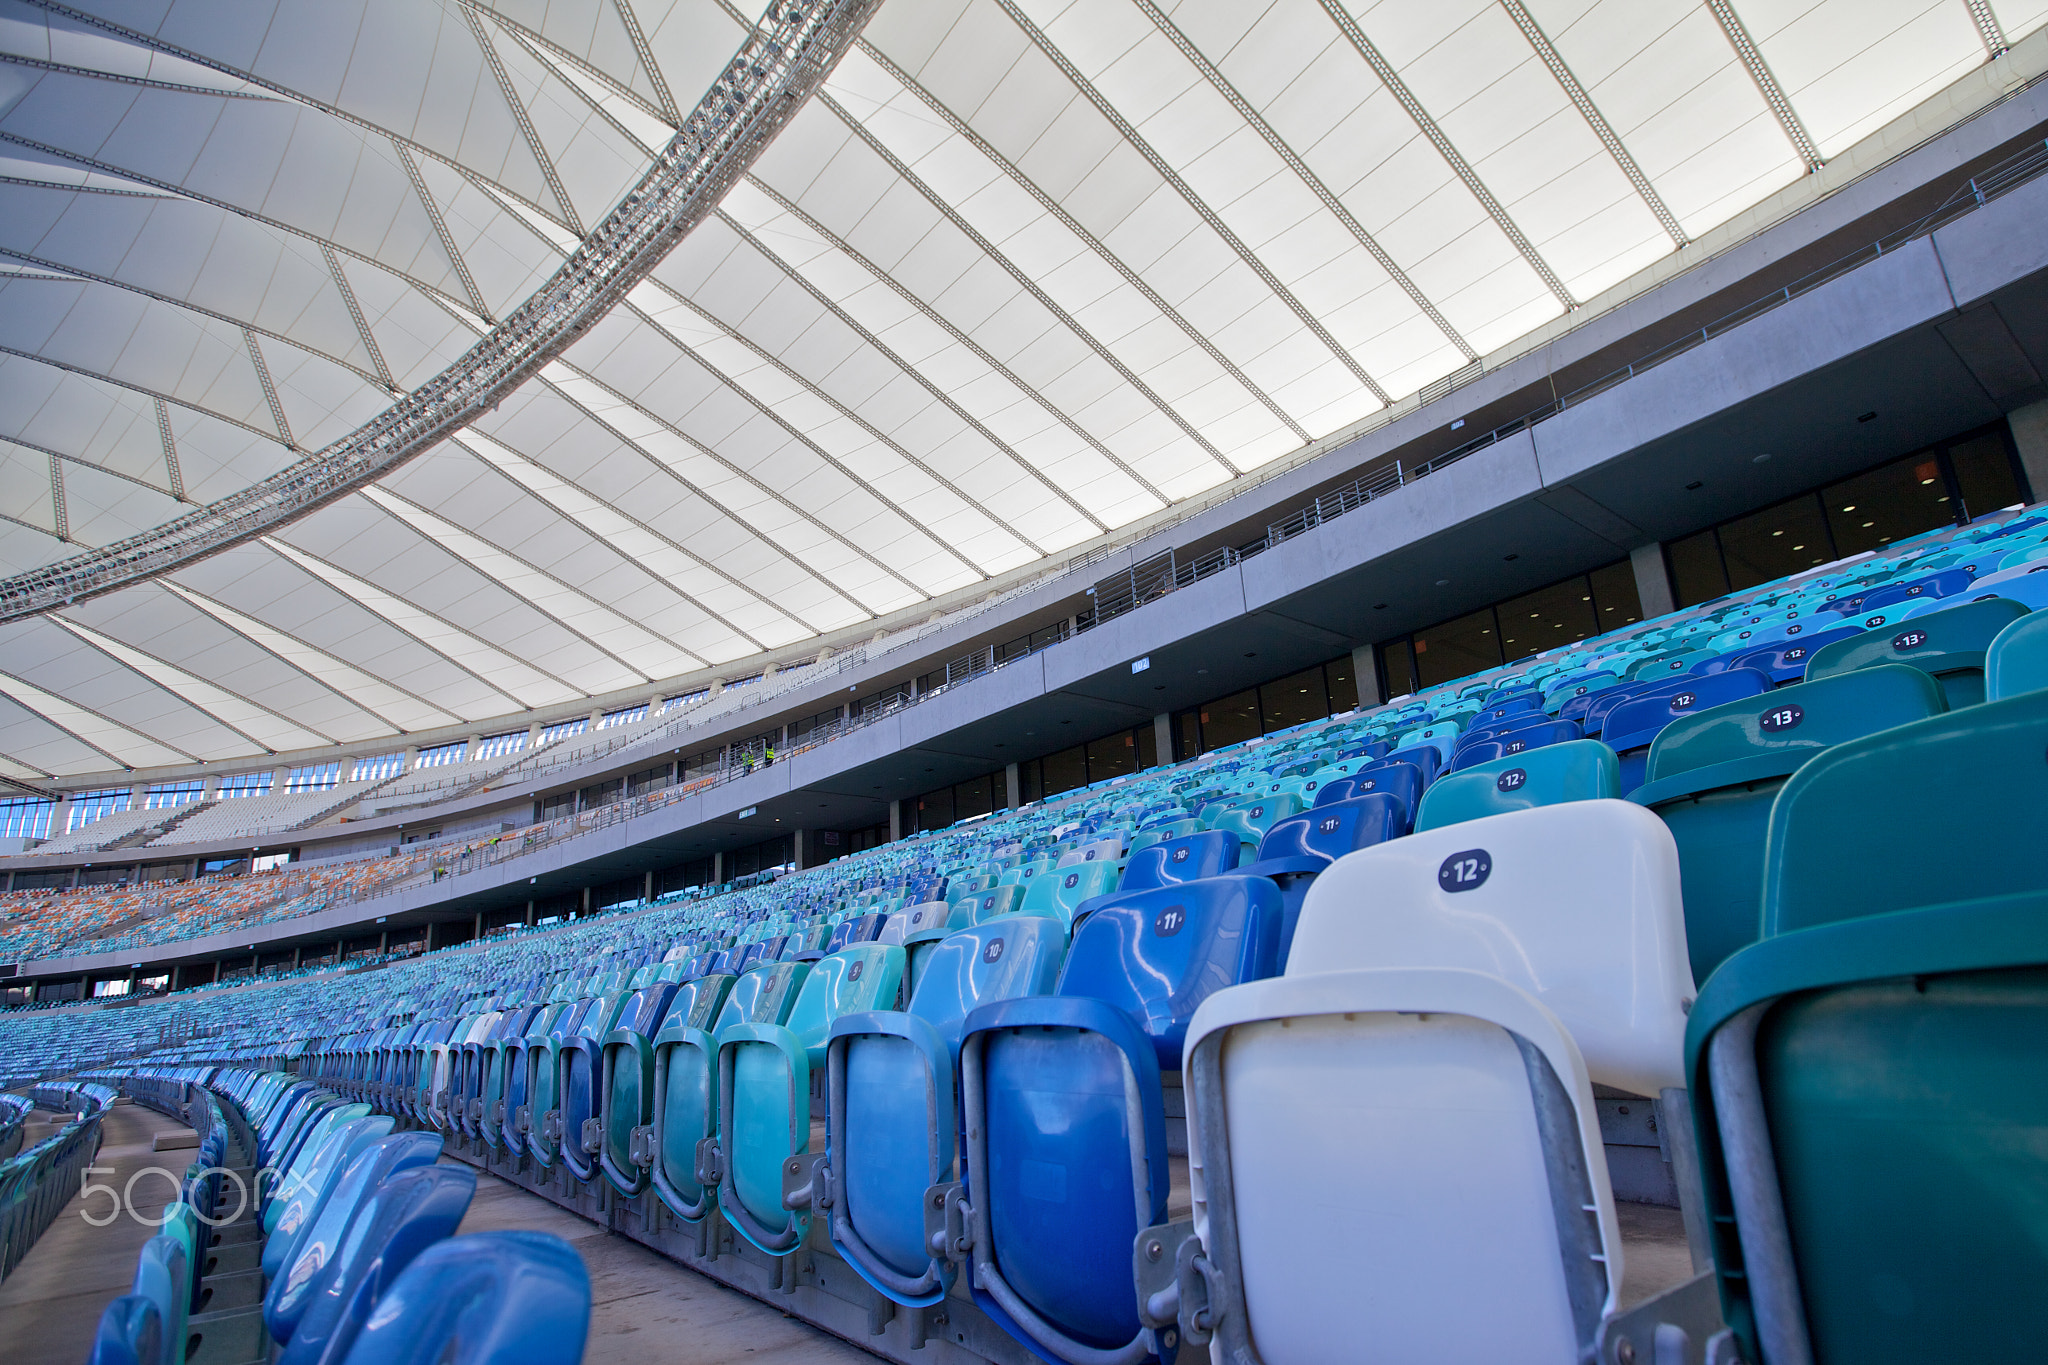 Moses Mabhida Stadium Fifa Football Seating Area and Covered by the Sails Roofing